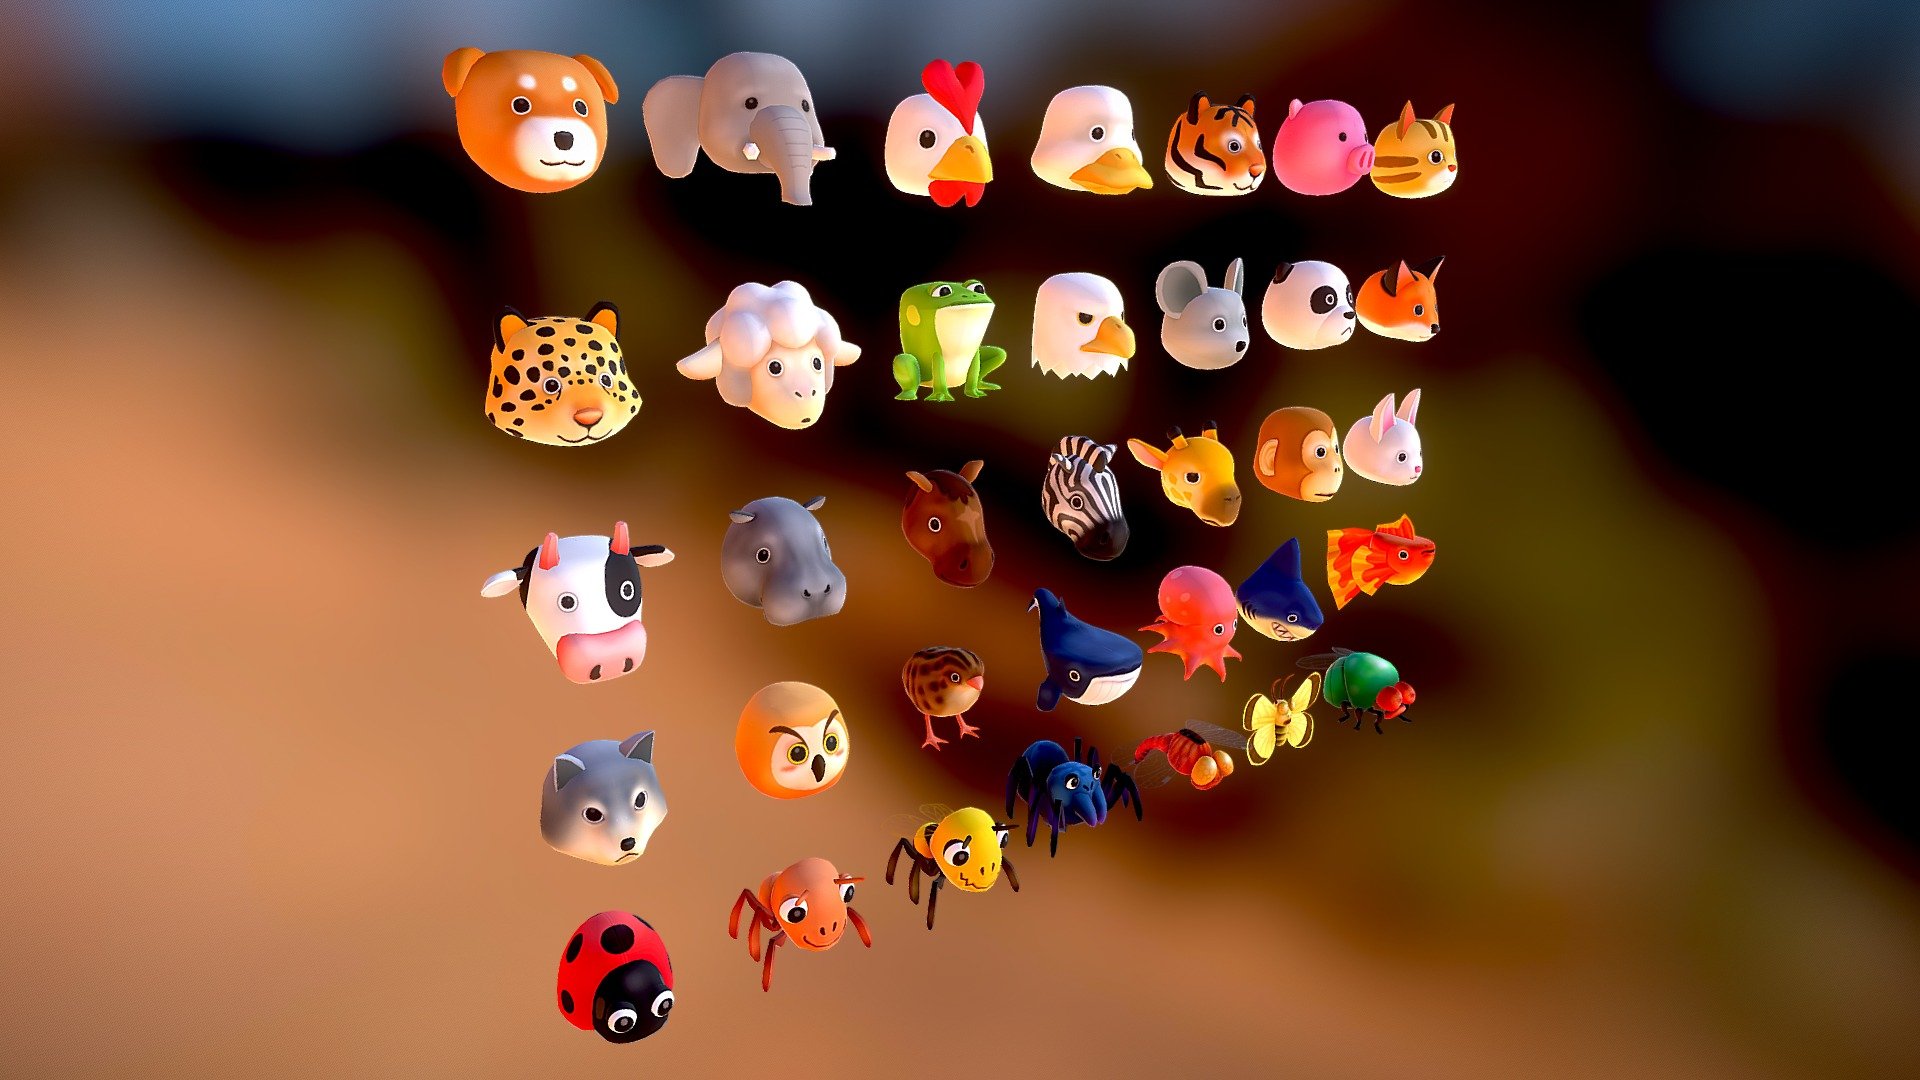 3D Props - Adorable Animal Set

You can use those icons for puzzle games, also can be used in children education games.

This package contains total of 35 FBX Items
texture size is 512x512, Atlas texture.

ant / bee / butterfly / cat / cow /dog / dragonfly / duck / eagle / elephant / fish / fly / fox / frog / giraffe / hippo / horse / ladybug / leopard / monkey / mouse / octopus / owl / panda / pig / quail / rabbit / shark / sheep / spider / tiger / whale / wolf / zebra - 3D Props - Adorable Animal Set - Buy Royalty Free 3D model by layerlab 3d model